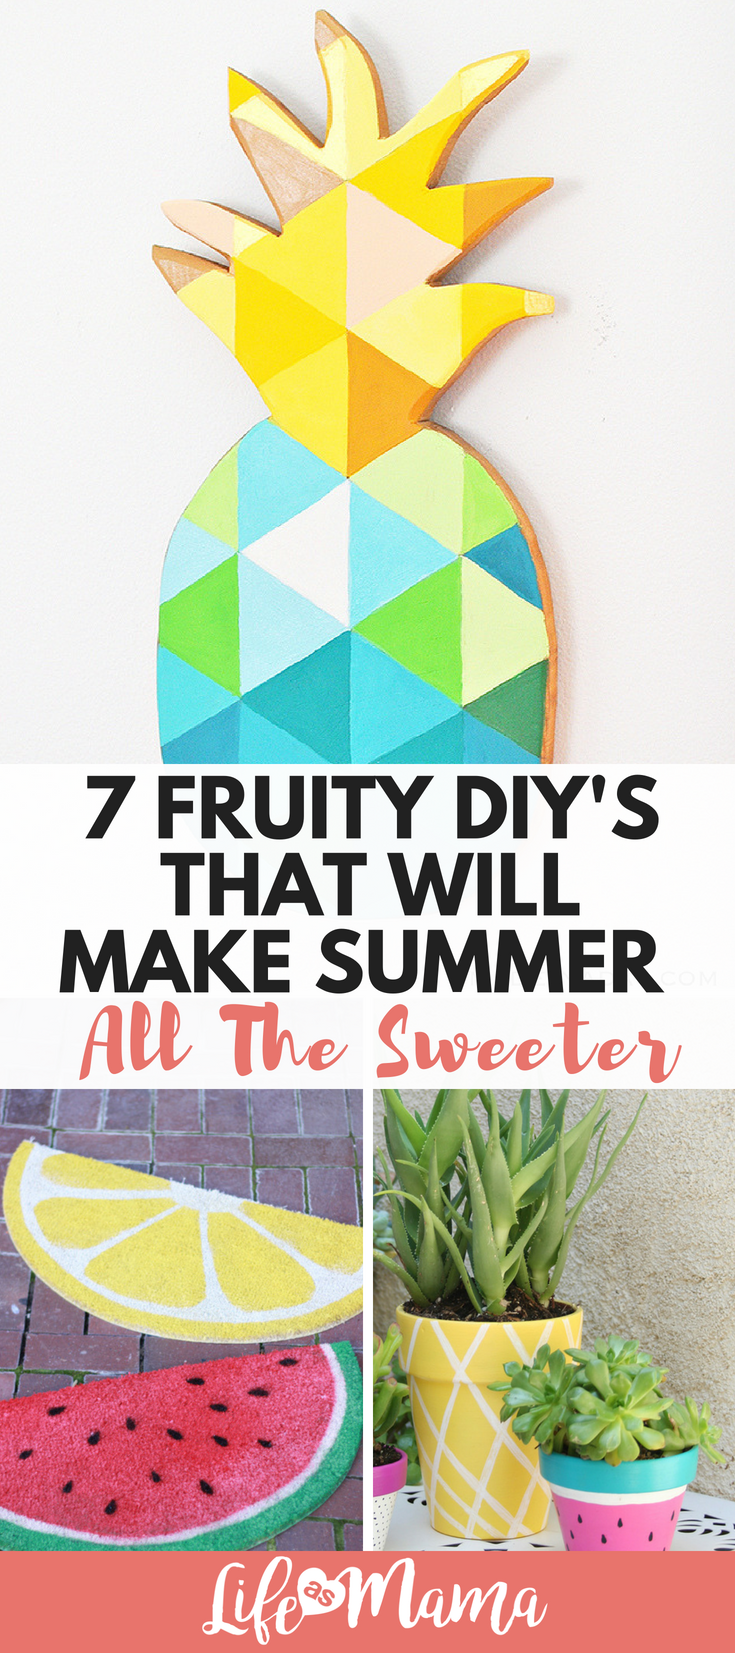 7 Fruity DIY's That Will Make Summer All The Sweeter -   21 outdoor summer crafts
 ideas